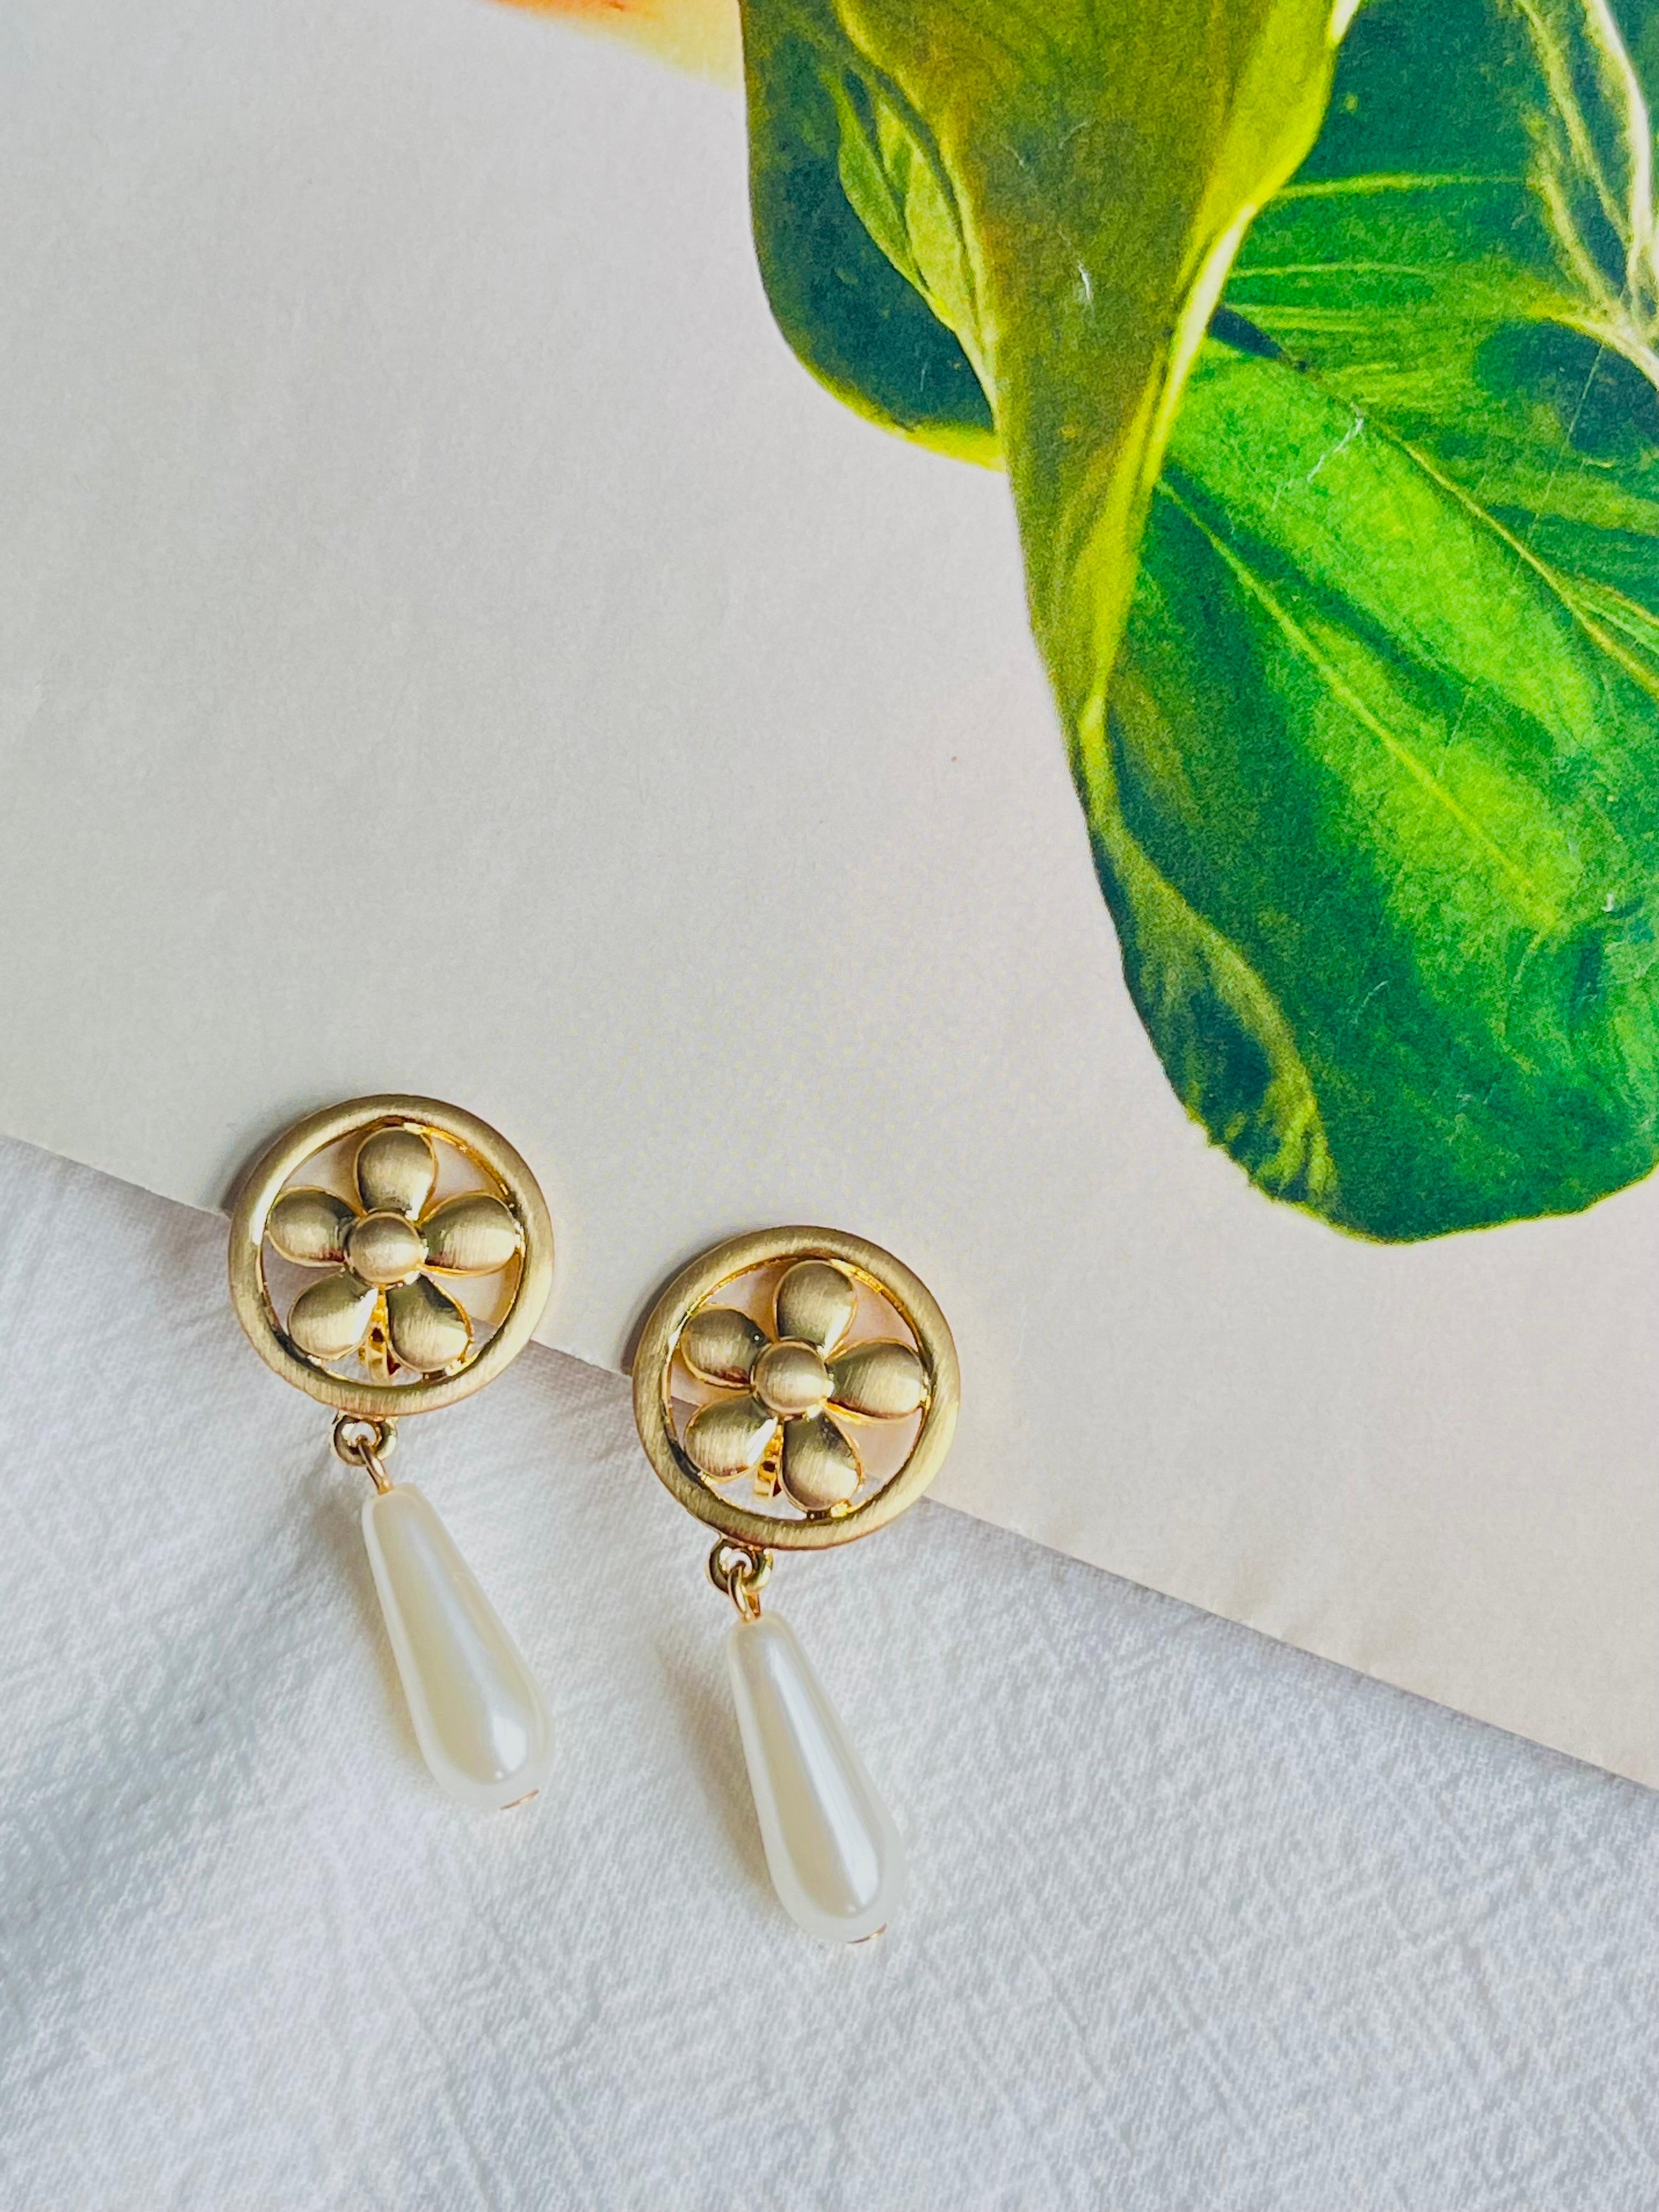 Flower Daisy Round Openwork Long Water Drop White Pearl Gold Pierced Earrings In New Condition For Sale In Wokingham, England